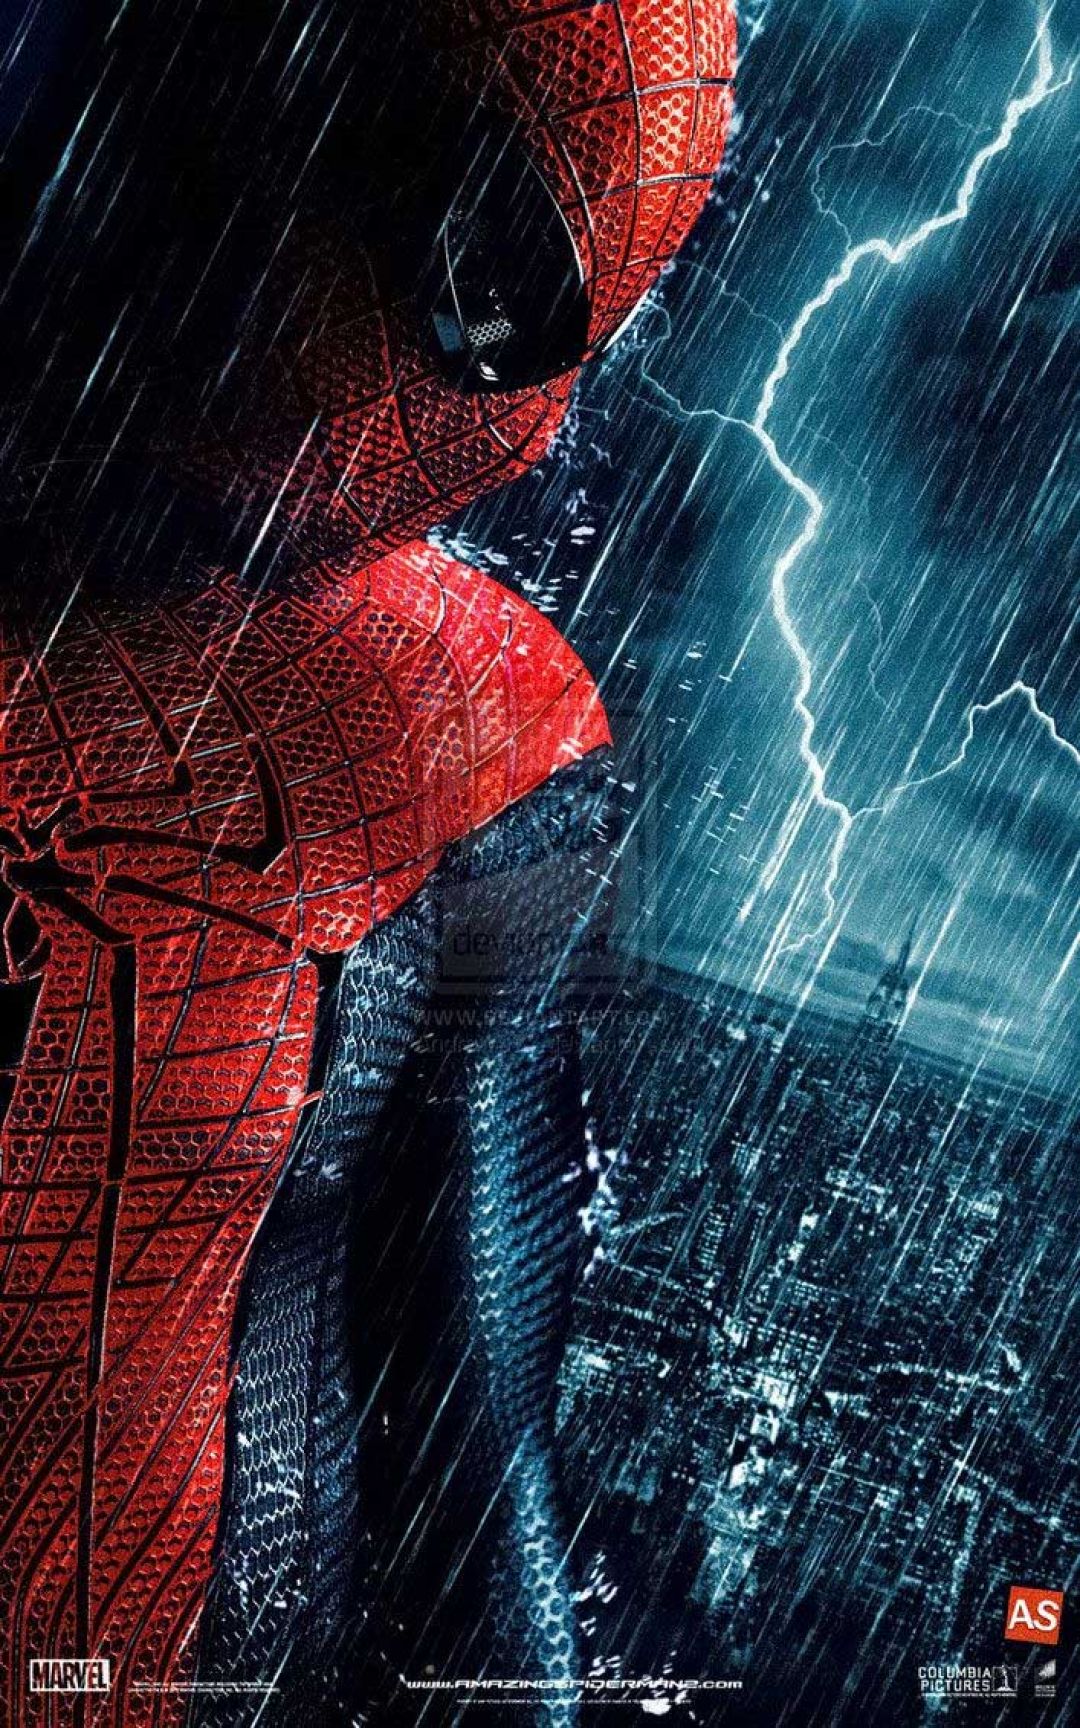 ✓[85+] The Amazing Spider Man 2 Wallpaper HD - Android / iPhone HD Wallpaper  Background Download (png / jpg) (2023)